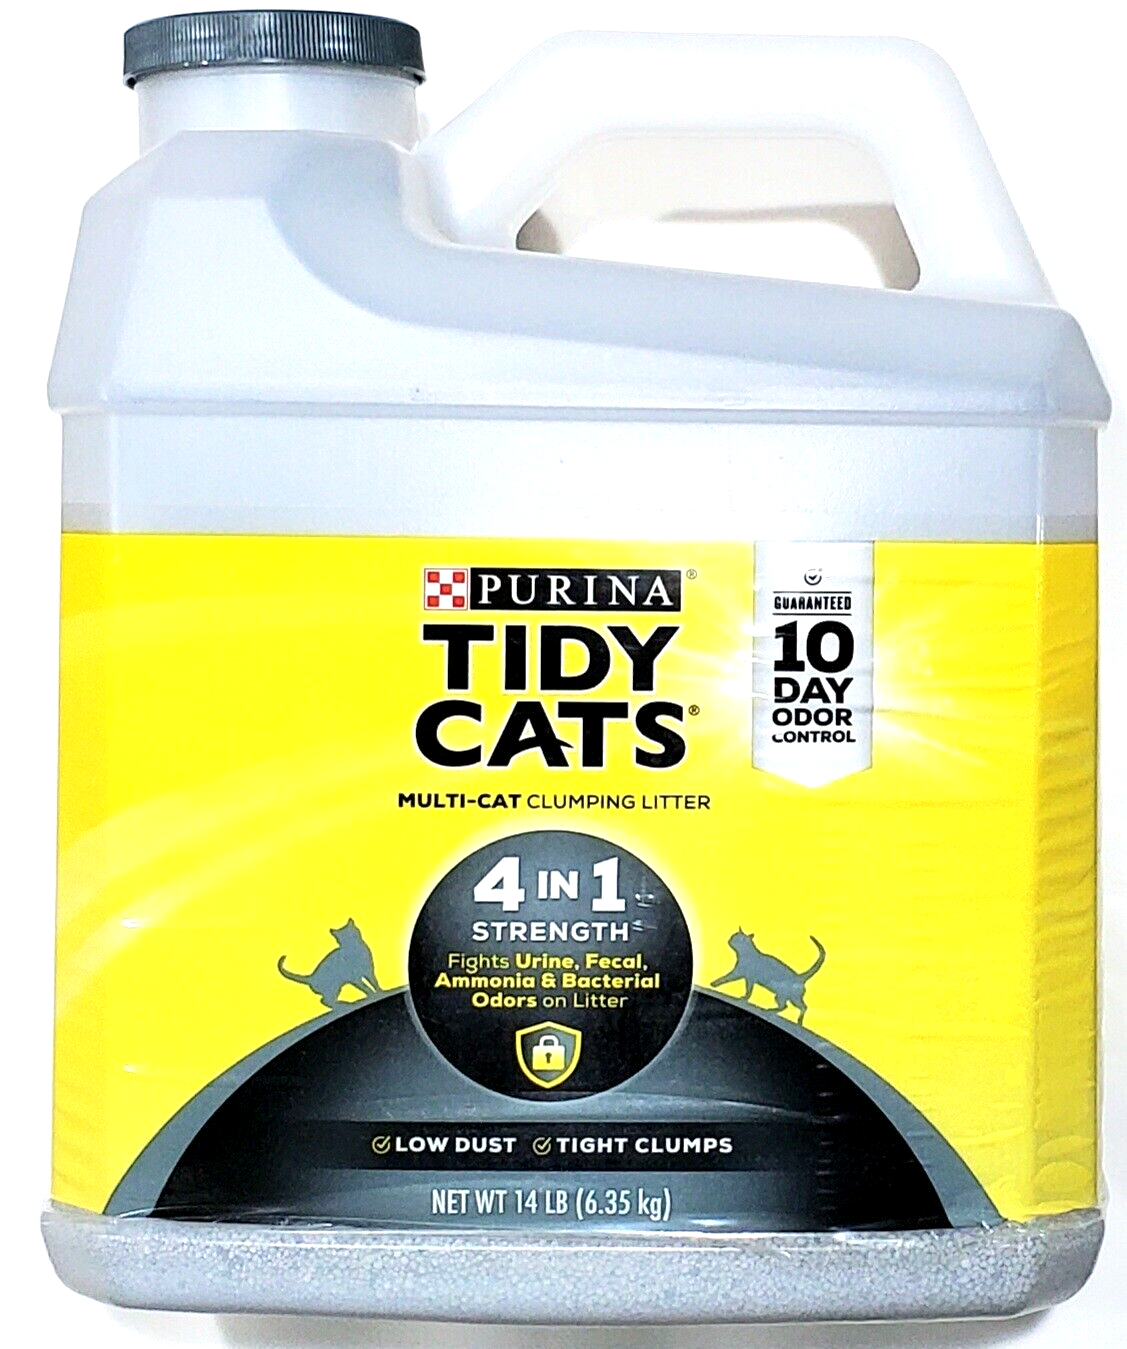 Purina Tidy Cats Multi Cat Clumping Litter 4 In 1 Strength Low Dust Tight Clumps - $37.99